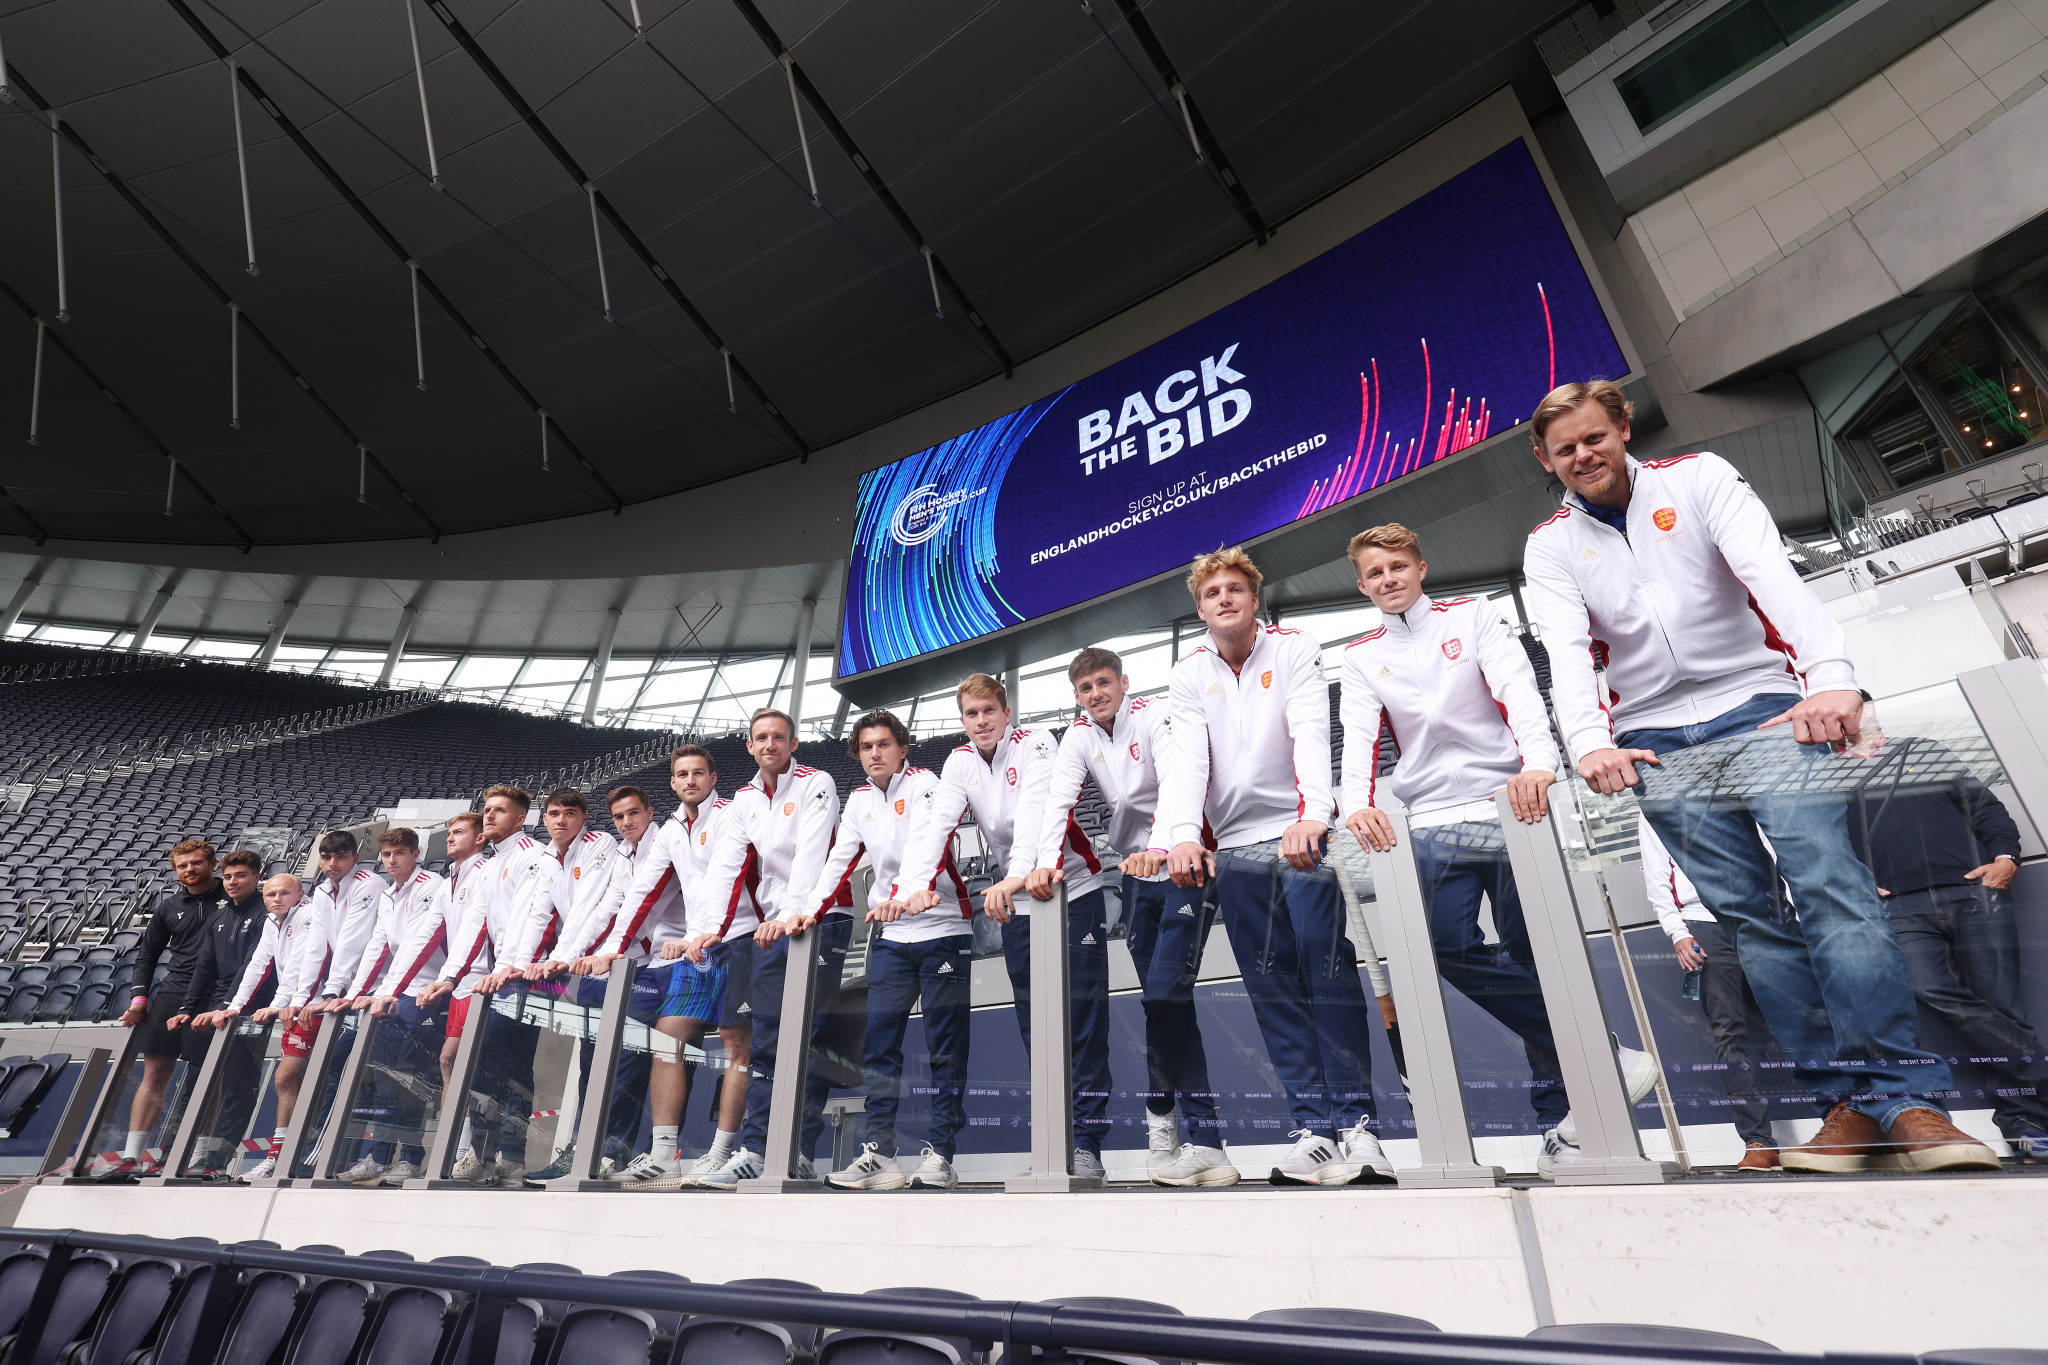 Organisers of England and Wales' bid for the 2026 Men's Hockey World Cup held a 